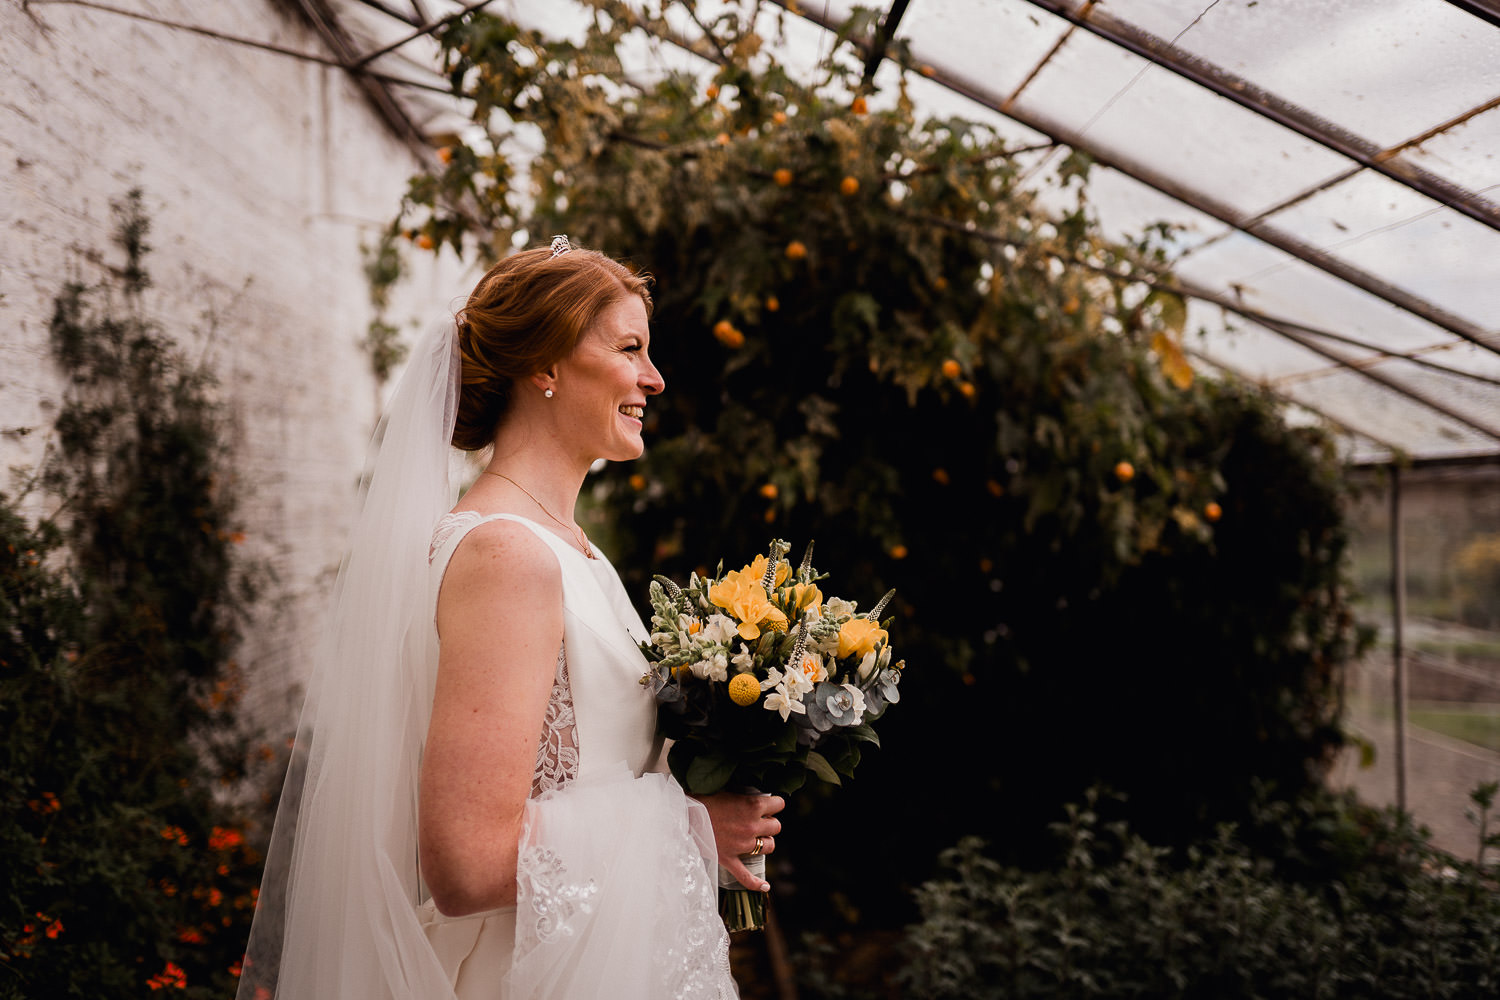 brideholding a bunch of yellow and white flowers